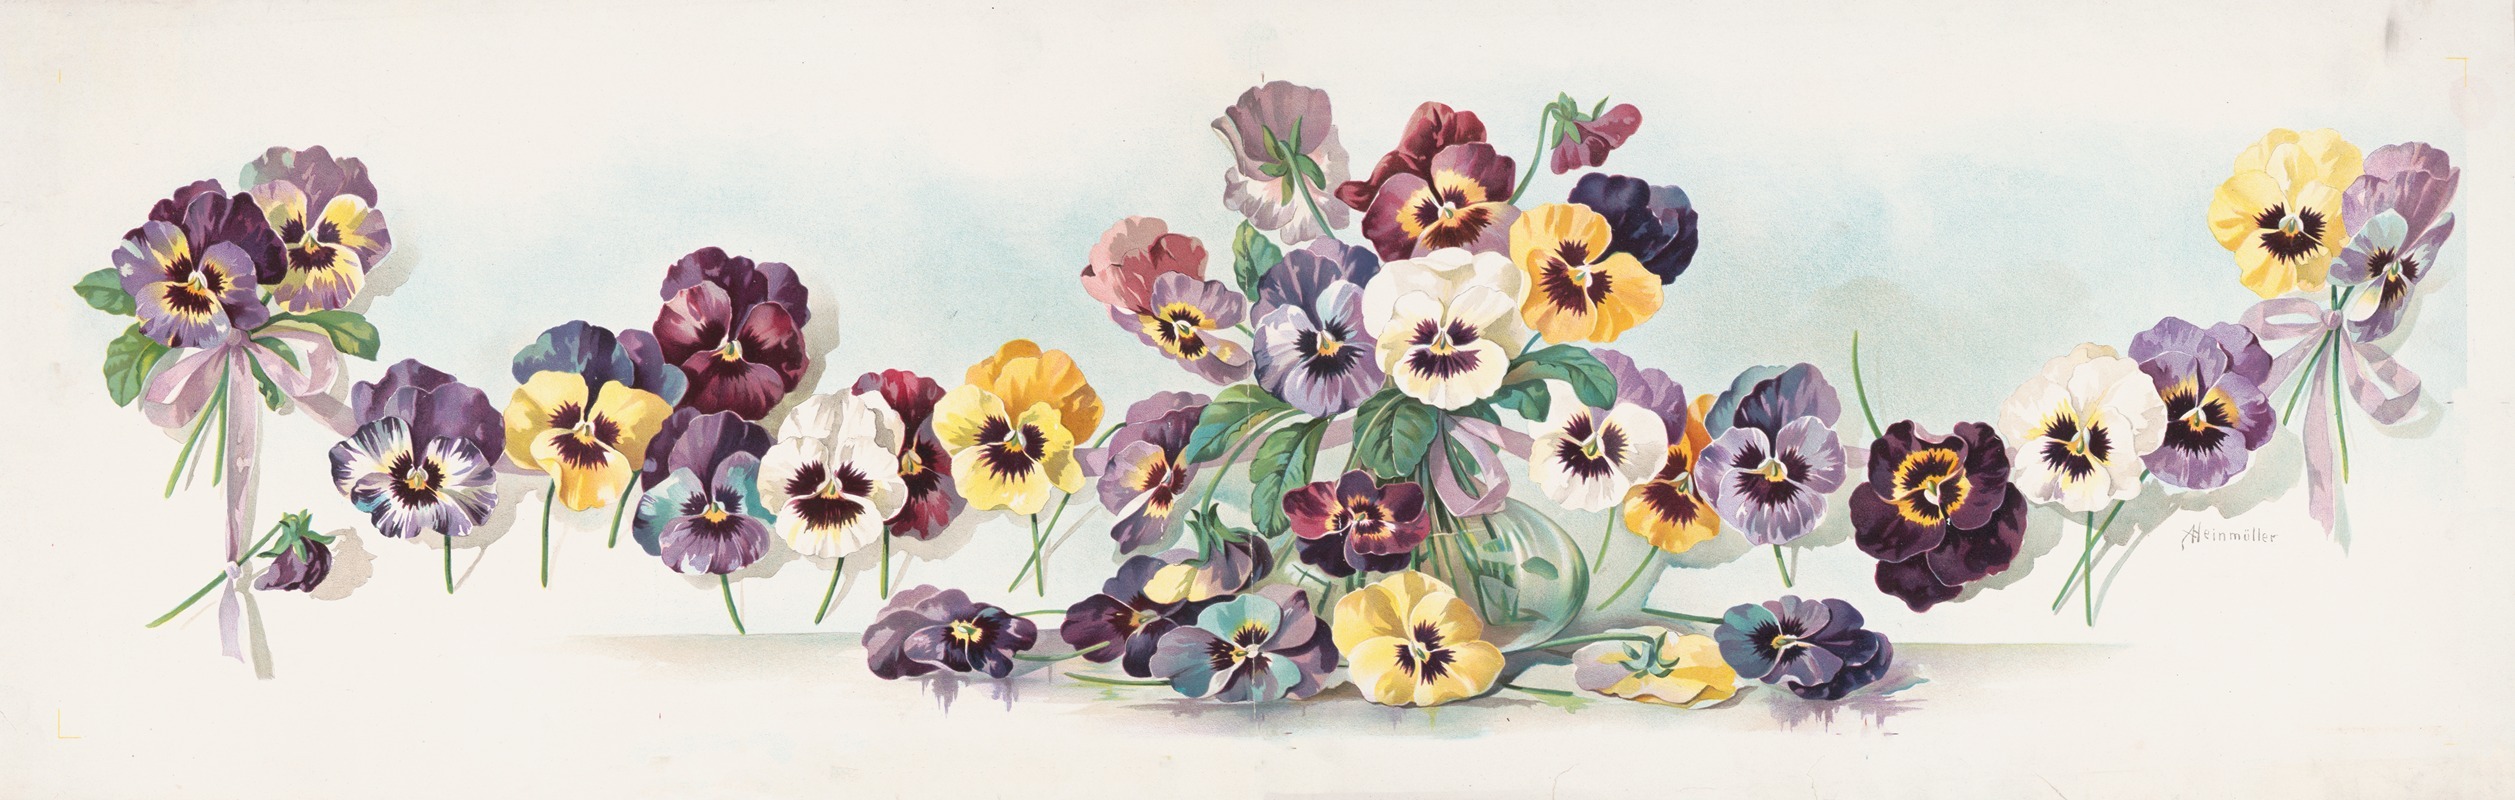 A. Heinmuller - Bouquet of pansies in glass vase